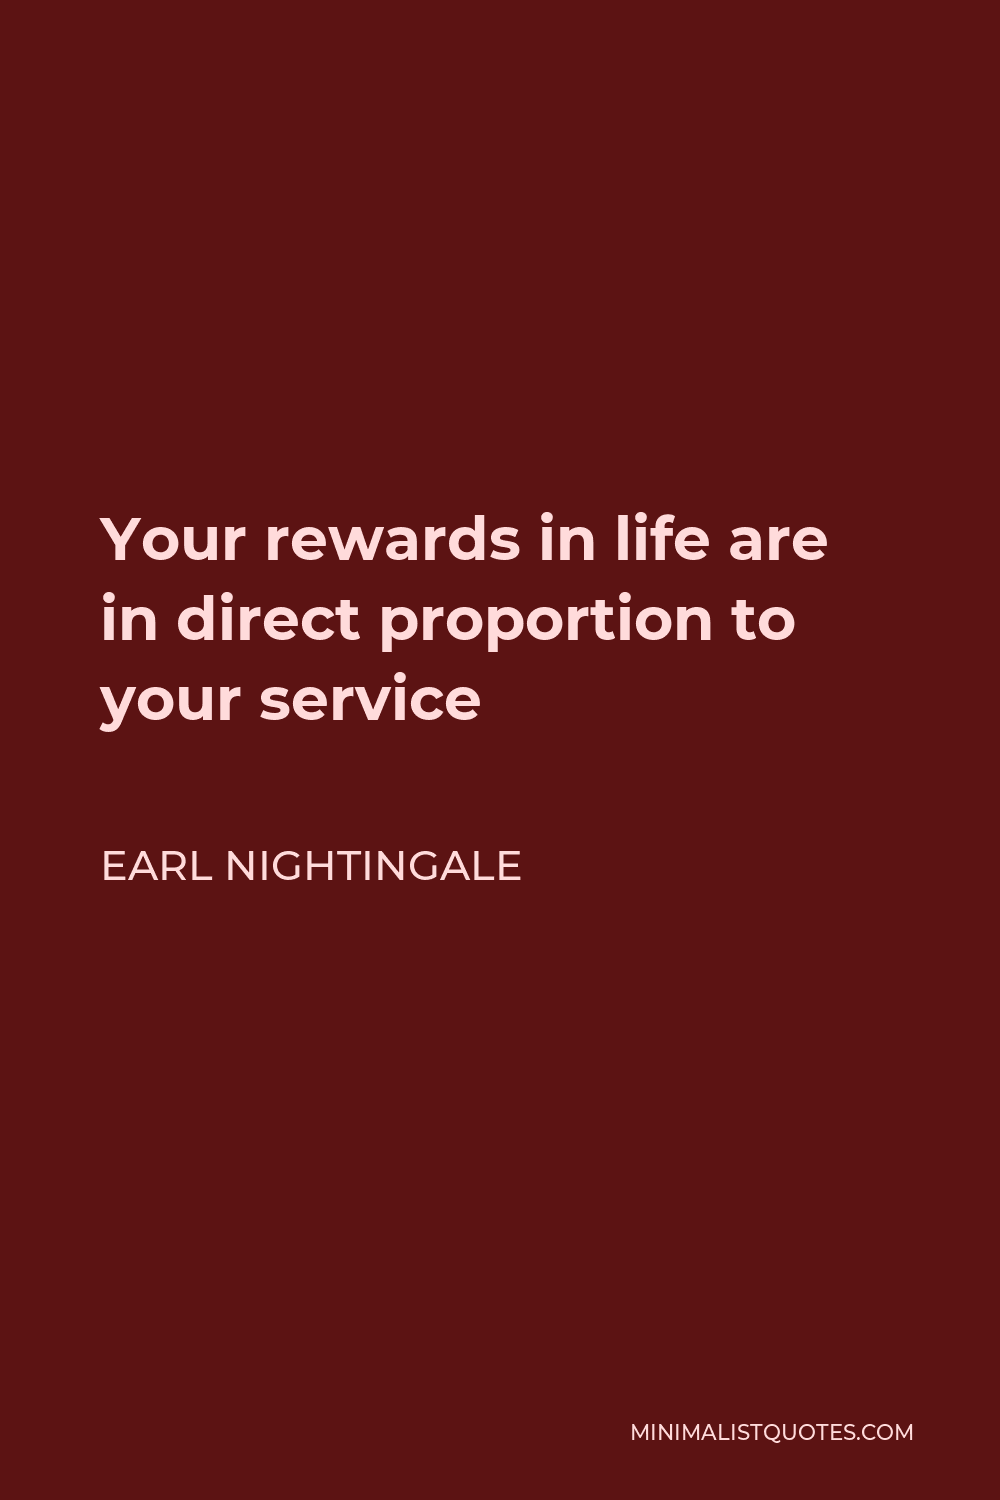 Earl Nightingale Quote - Your rewards in life are in direct proportion to your service